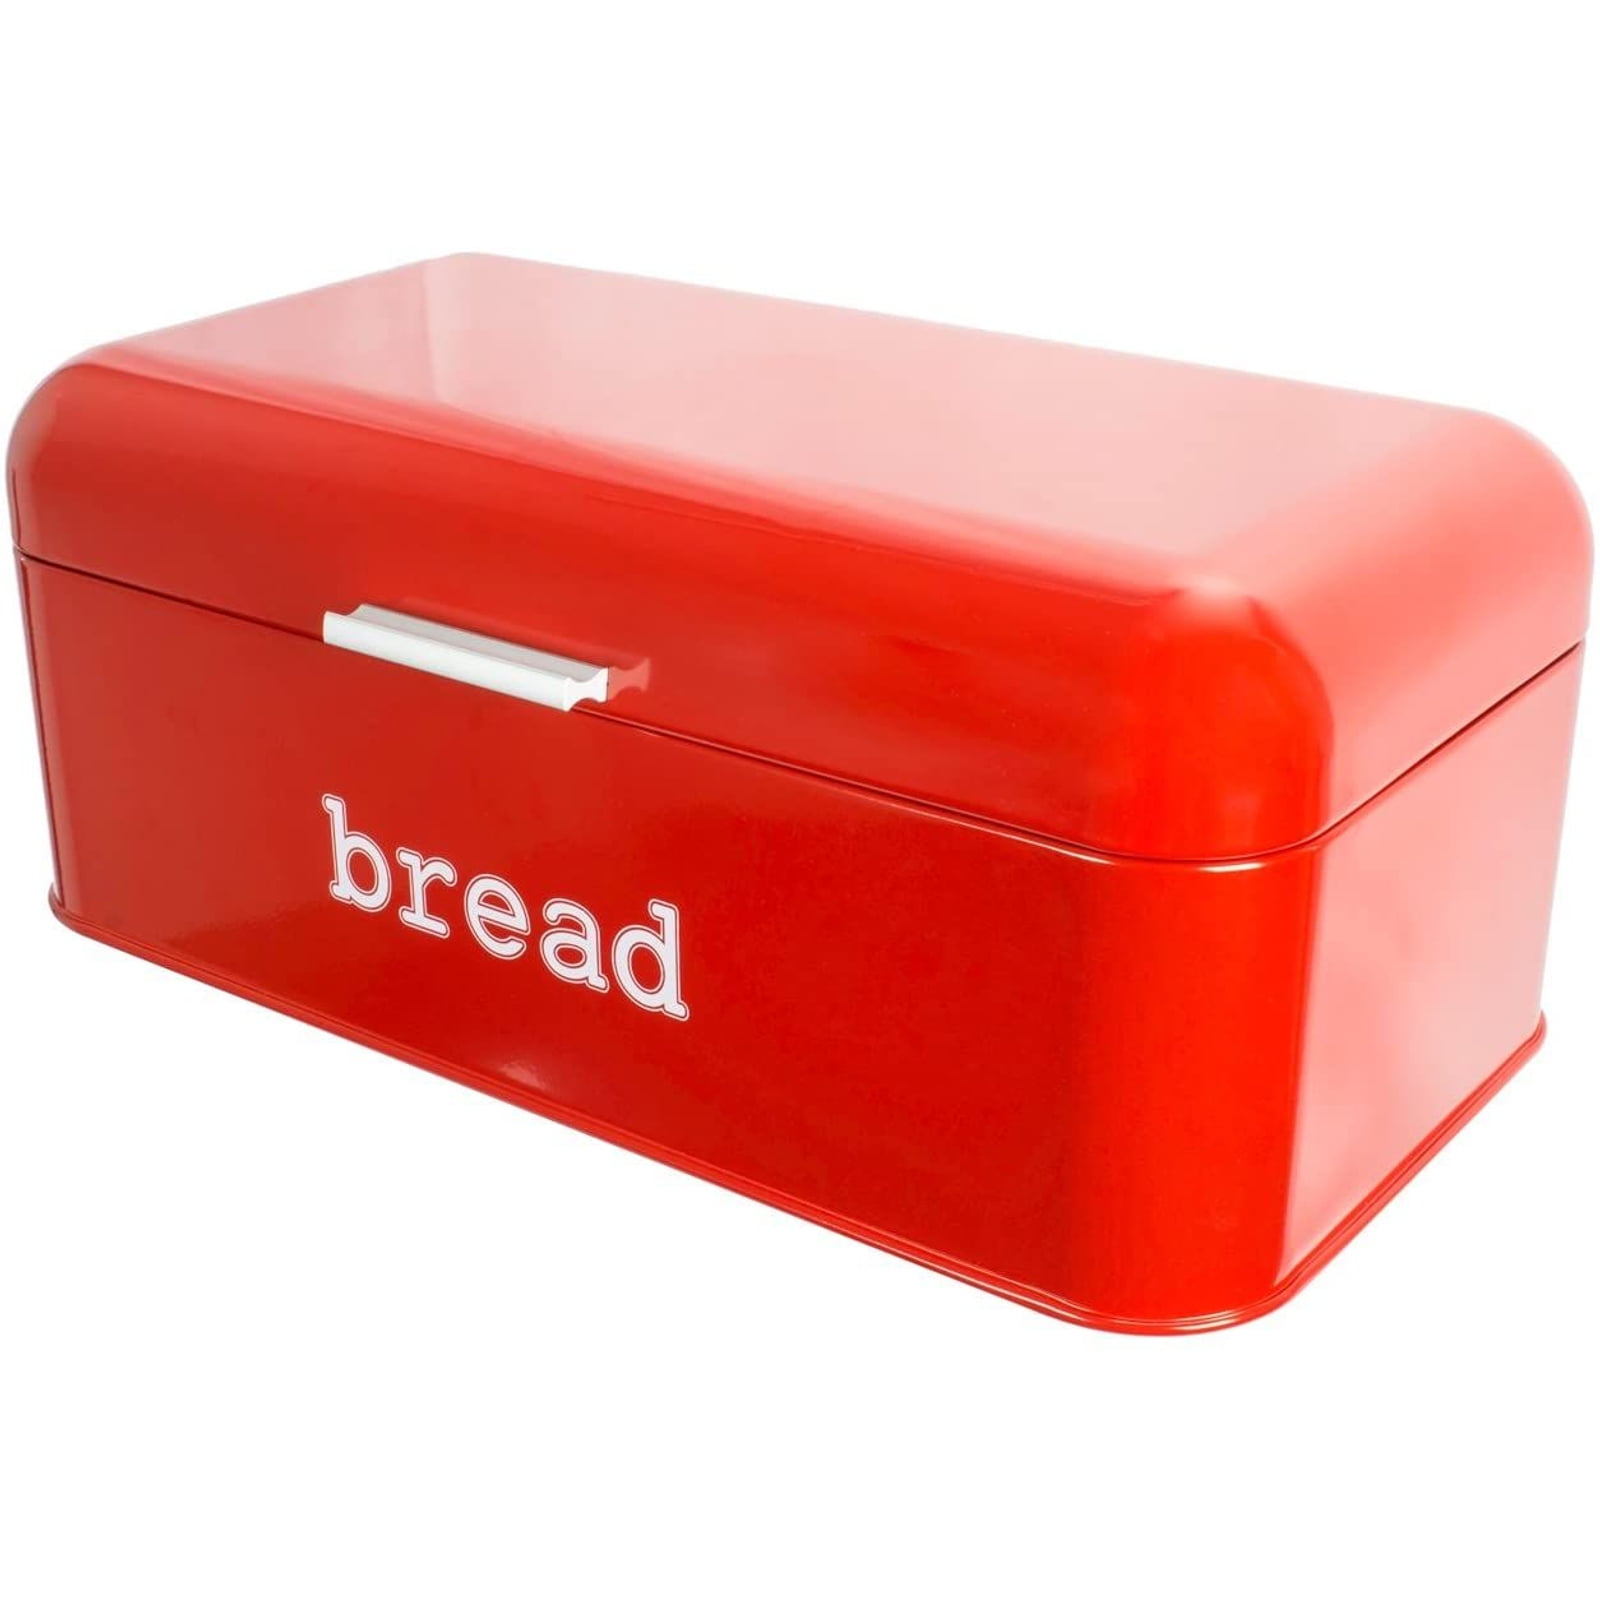 Red Vintage Style Large Stainless Steel Bread Loaf Bin for Kitchen Storage